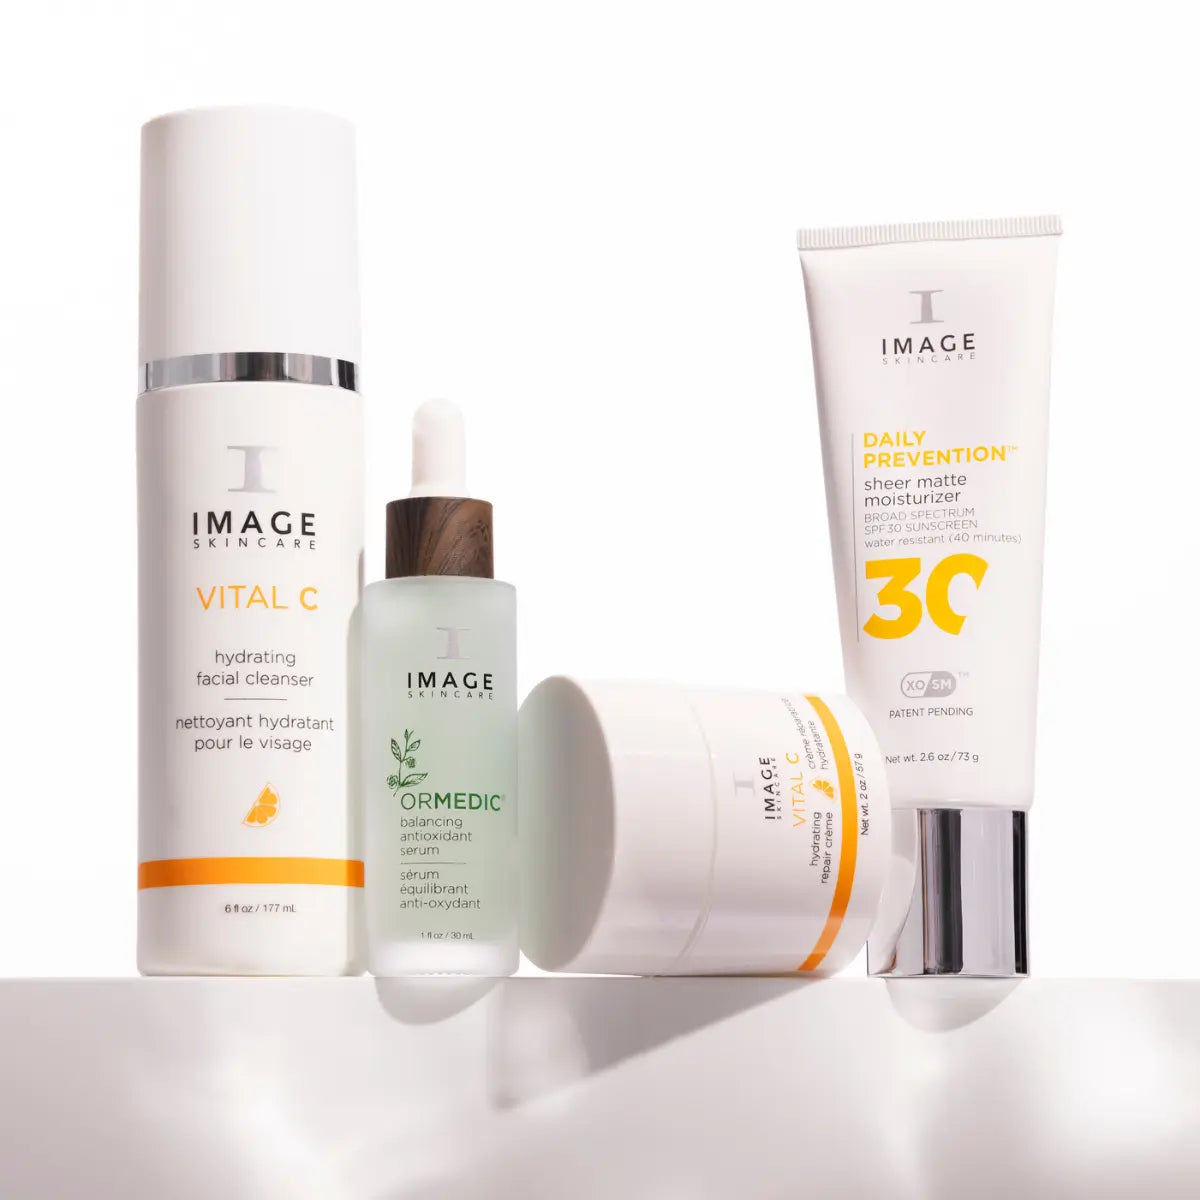 image skincare products